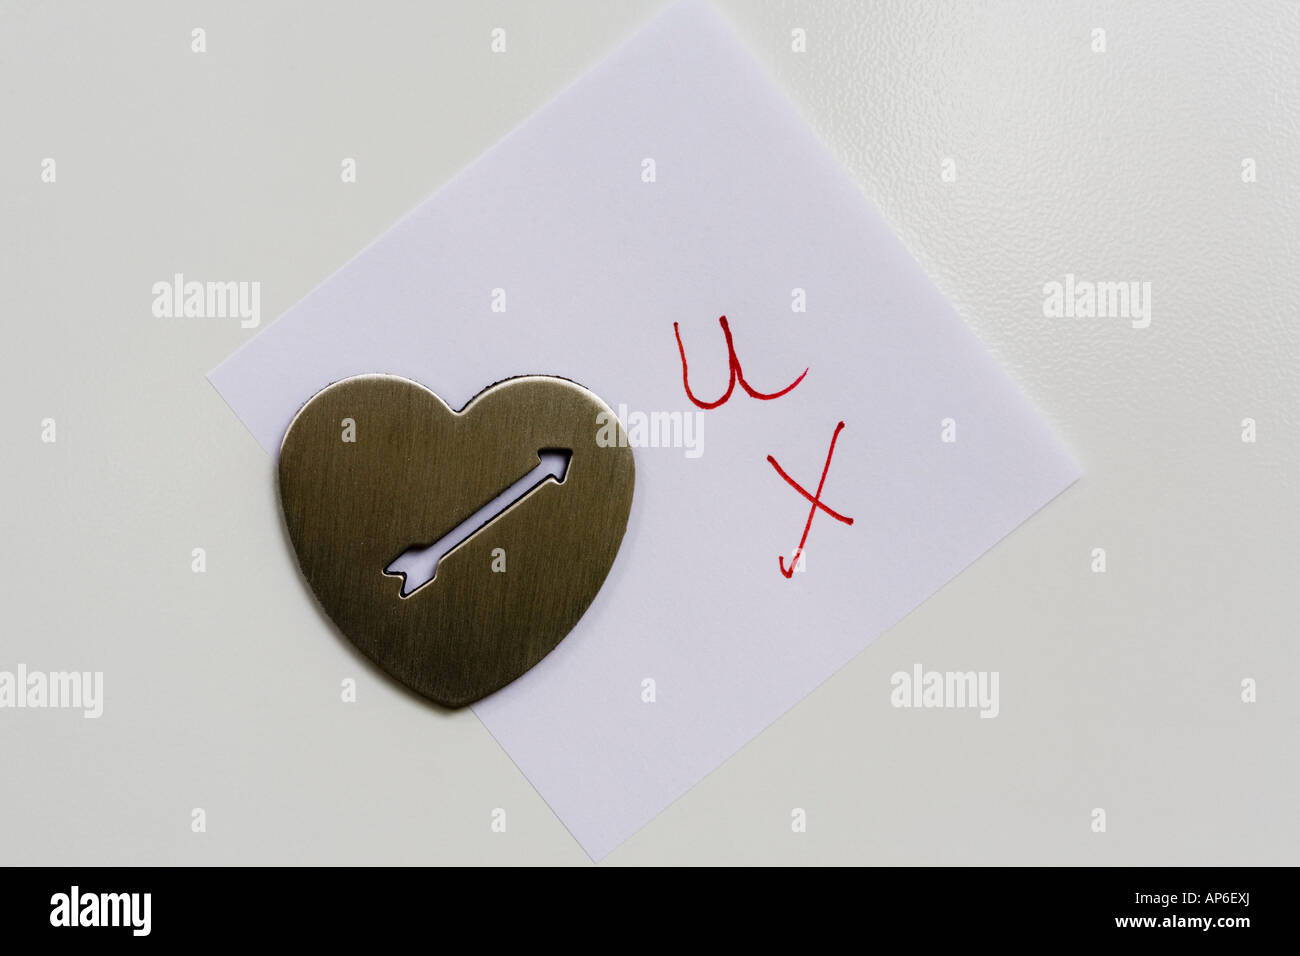 Heart attracts hearts with magnet Stock Photo by ©valdum 97951924